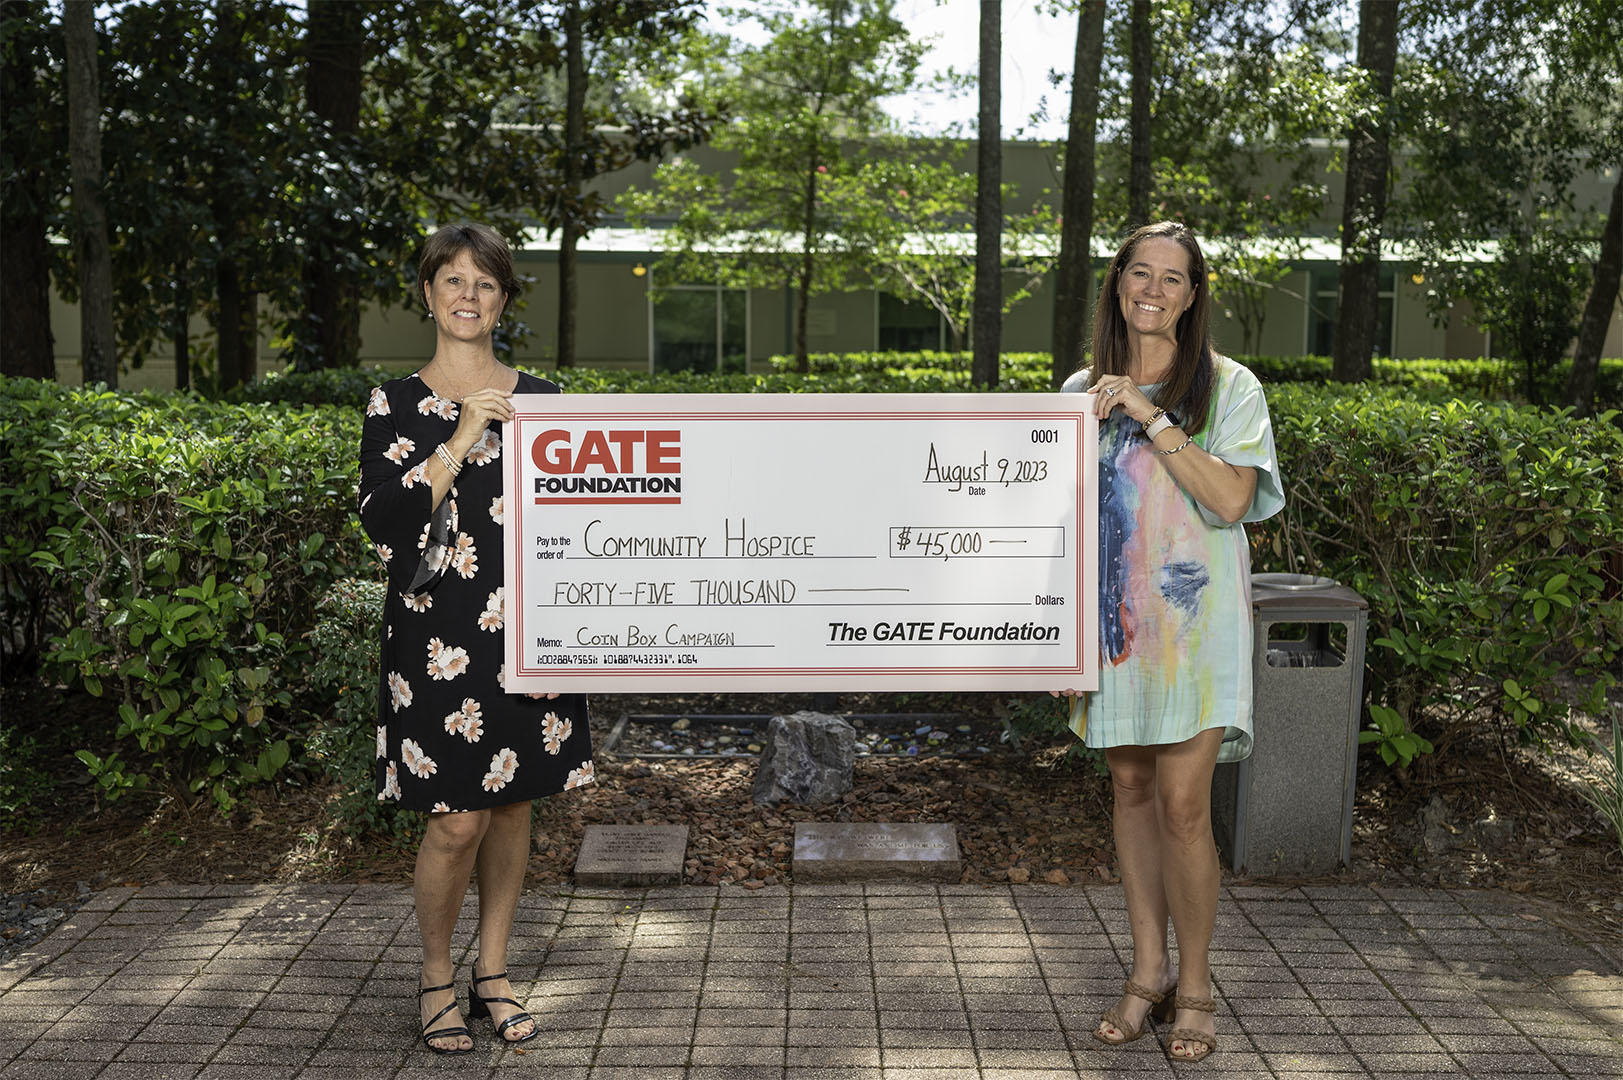 THE GATE FOUNDATION RAISE $48,000 FOR COMMUNITY HOSPICES